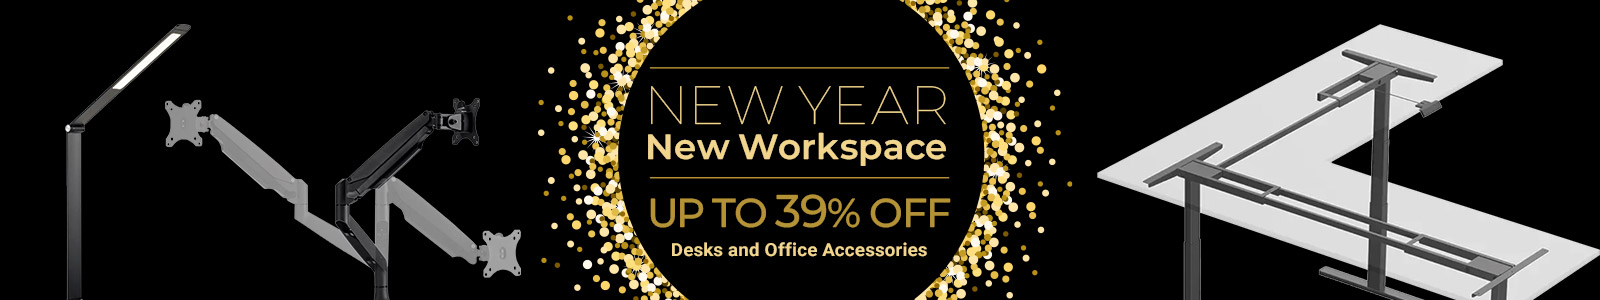 New Year, New Workspace
Up to 39% off
Desks and Office Accessories 
Shop Now